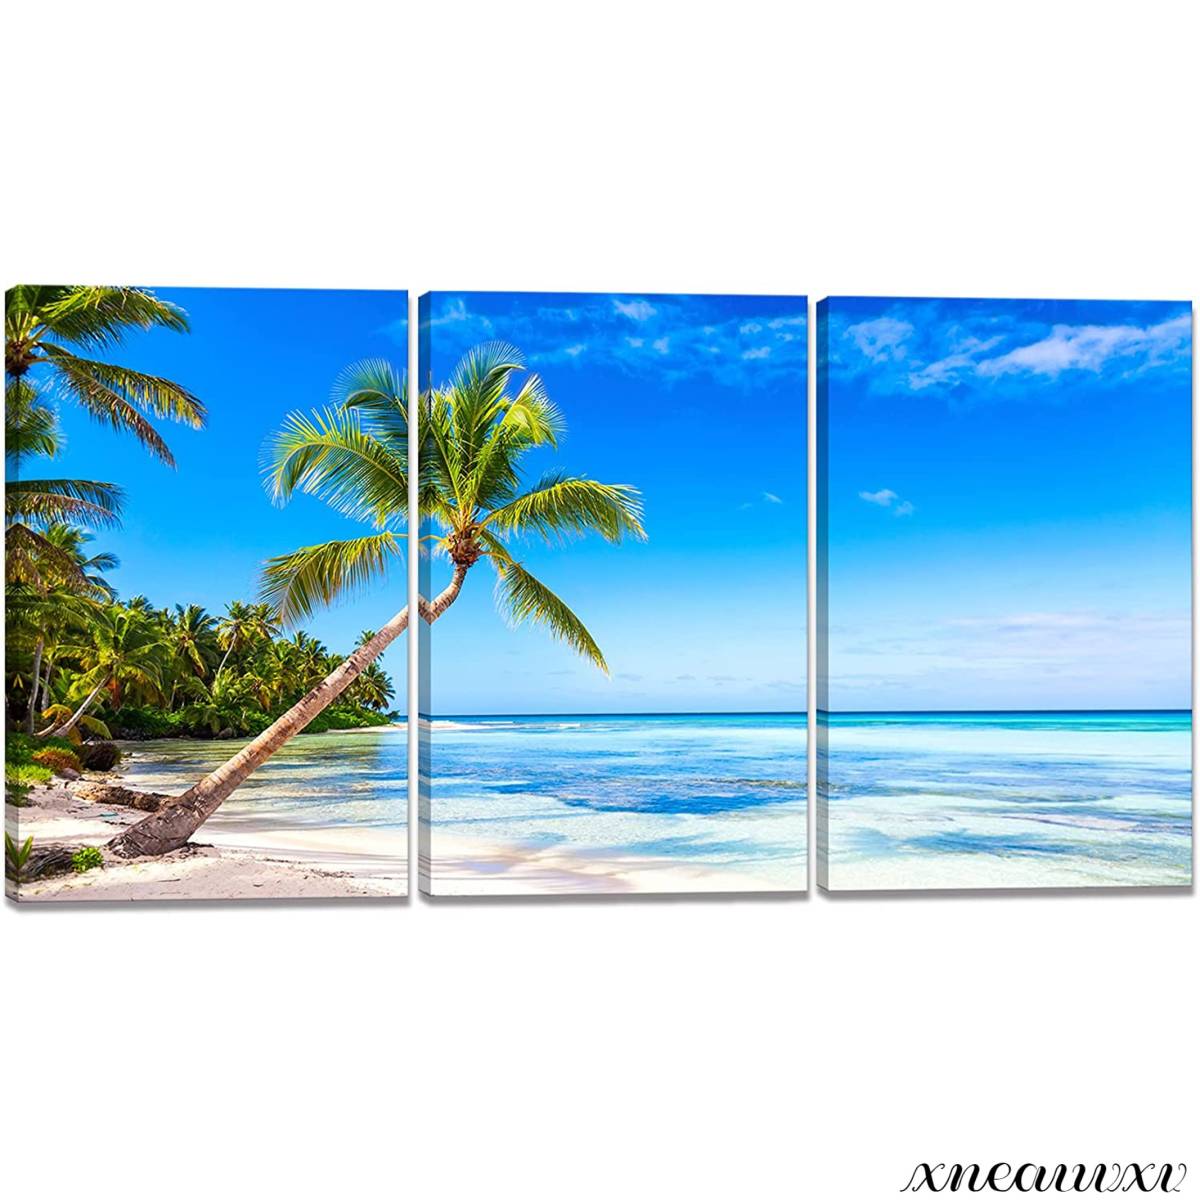 Tropical Beach 3-Panel Art Panel Nature Sea Landscape Interior Wall Hanging Room Decoration Decorative Painting Canvas Painting Stylish Overseas Art Appreciation Redecoration Interior, Artwork, Painting, graphic